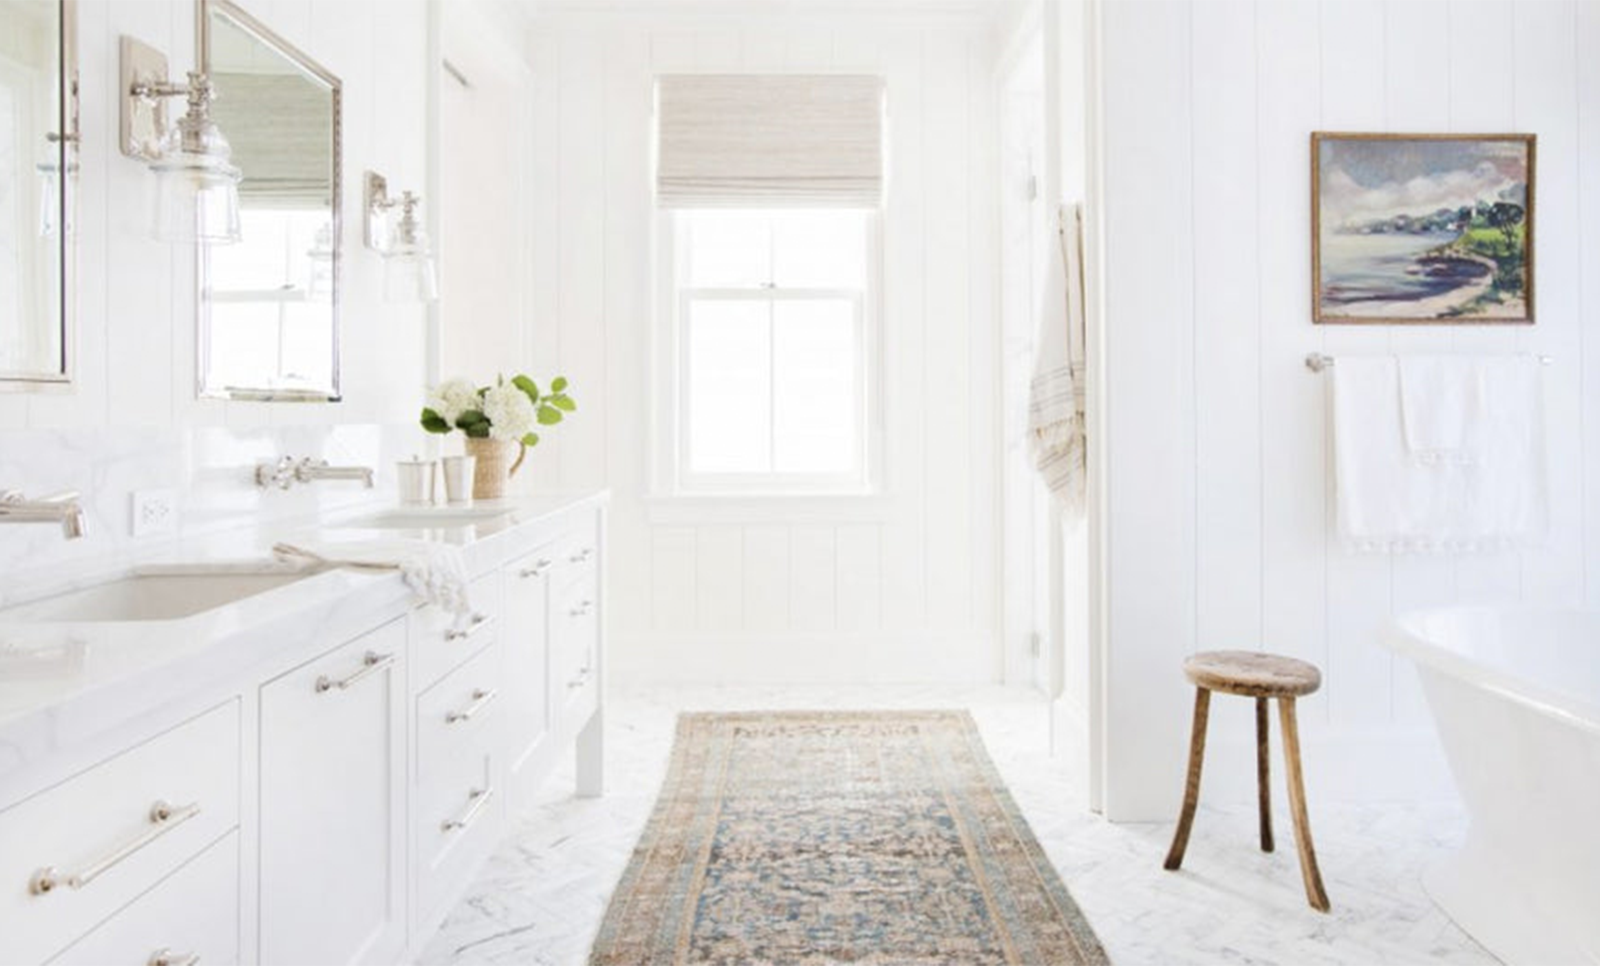 THE MOROCCAN CARPET: IDEAL FOR YOUR BATHROOM!